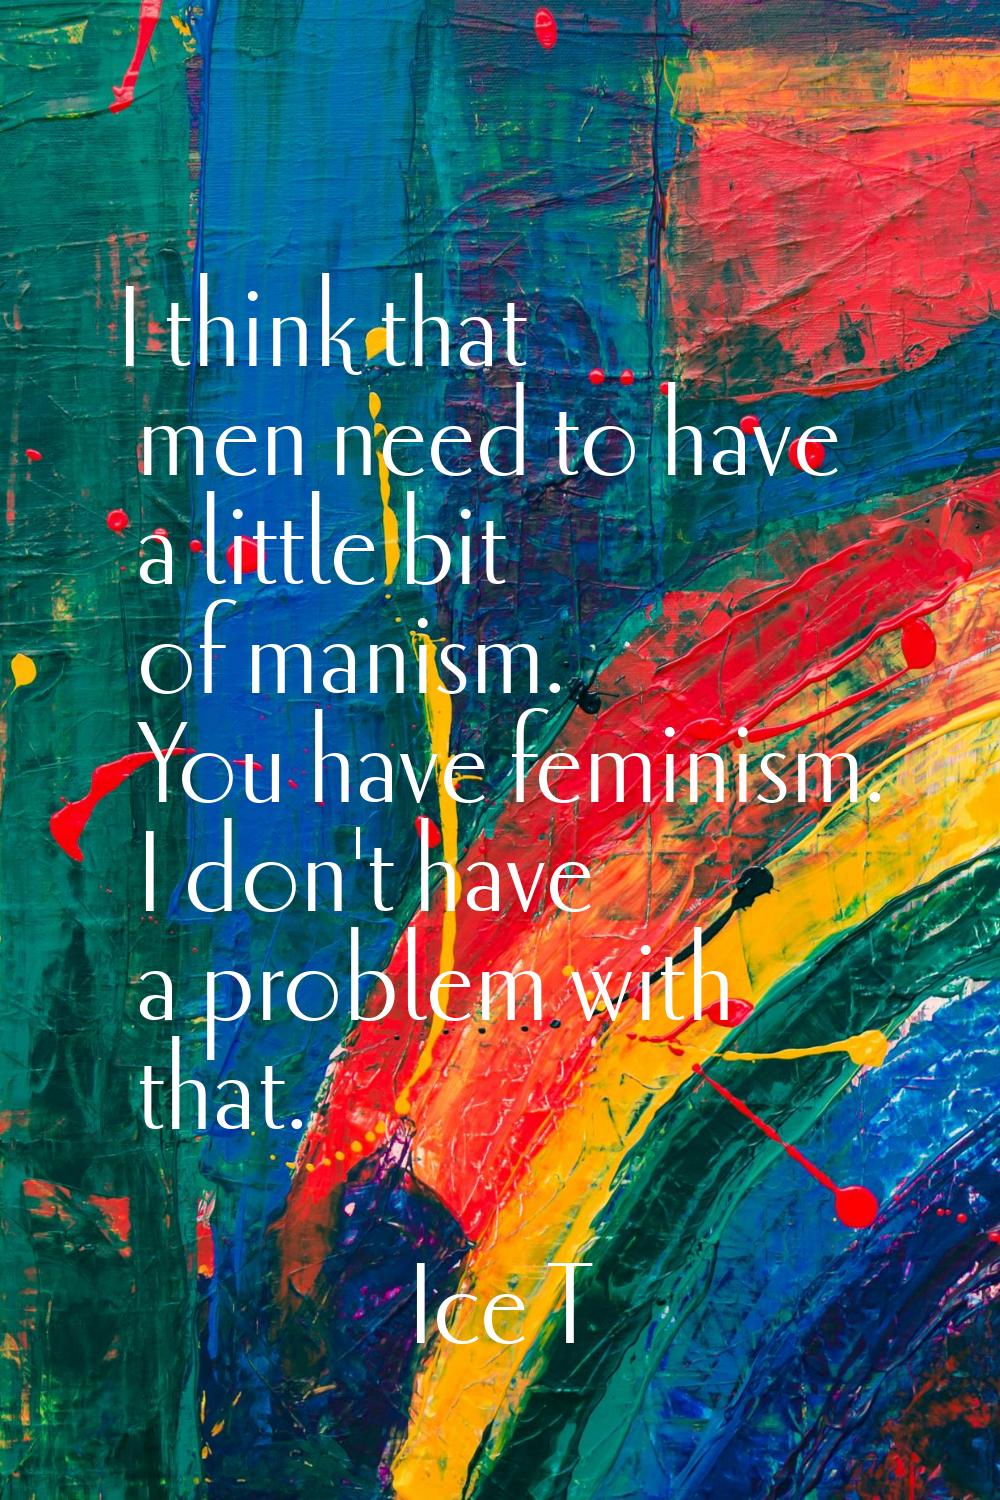 I think that men need to have a little bit of manism. You have feminism. I don't have a problem wit